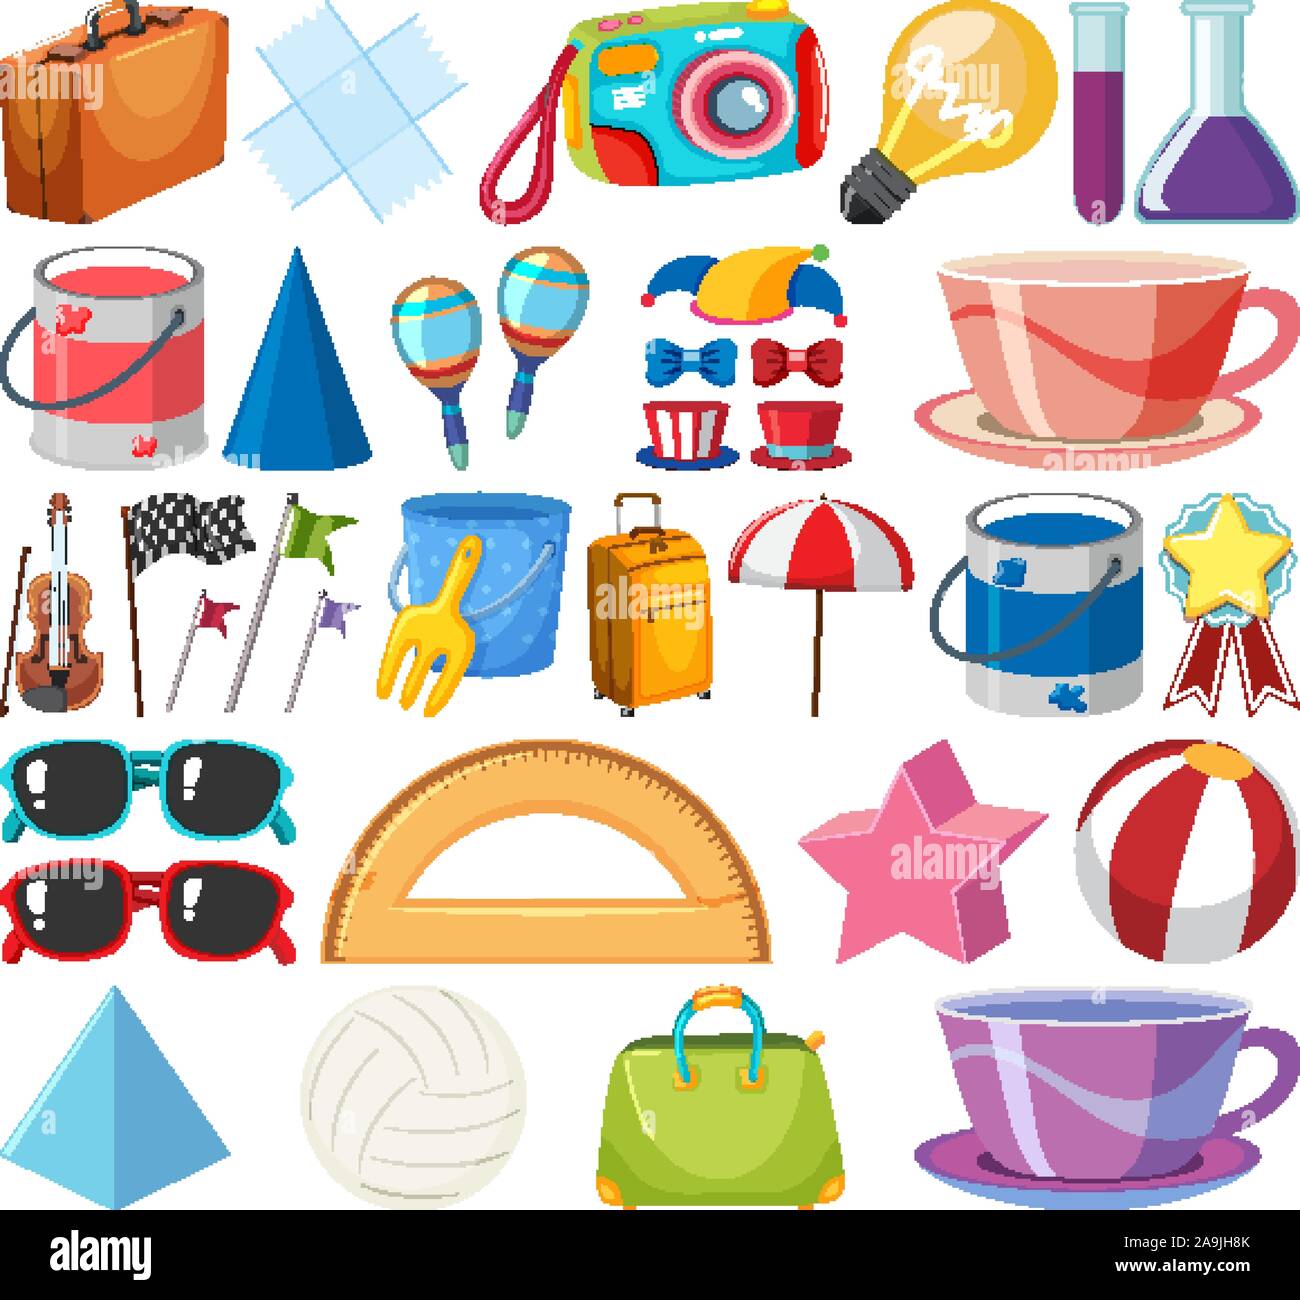 Set of isolated objects theme school items illustration Stock Vector ...